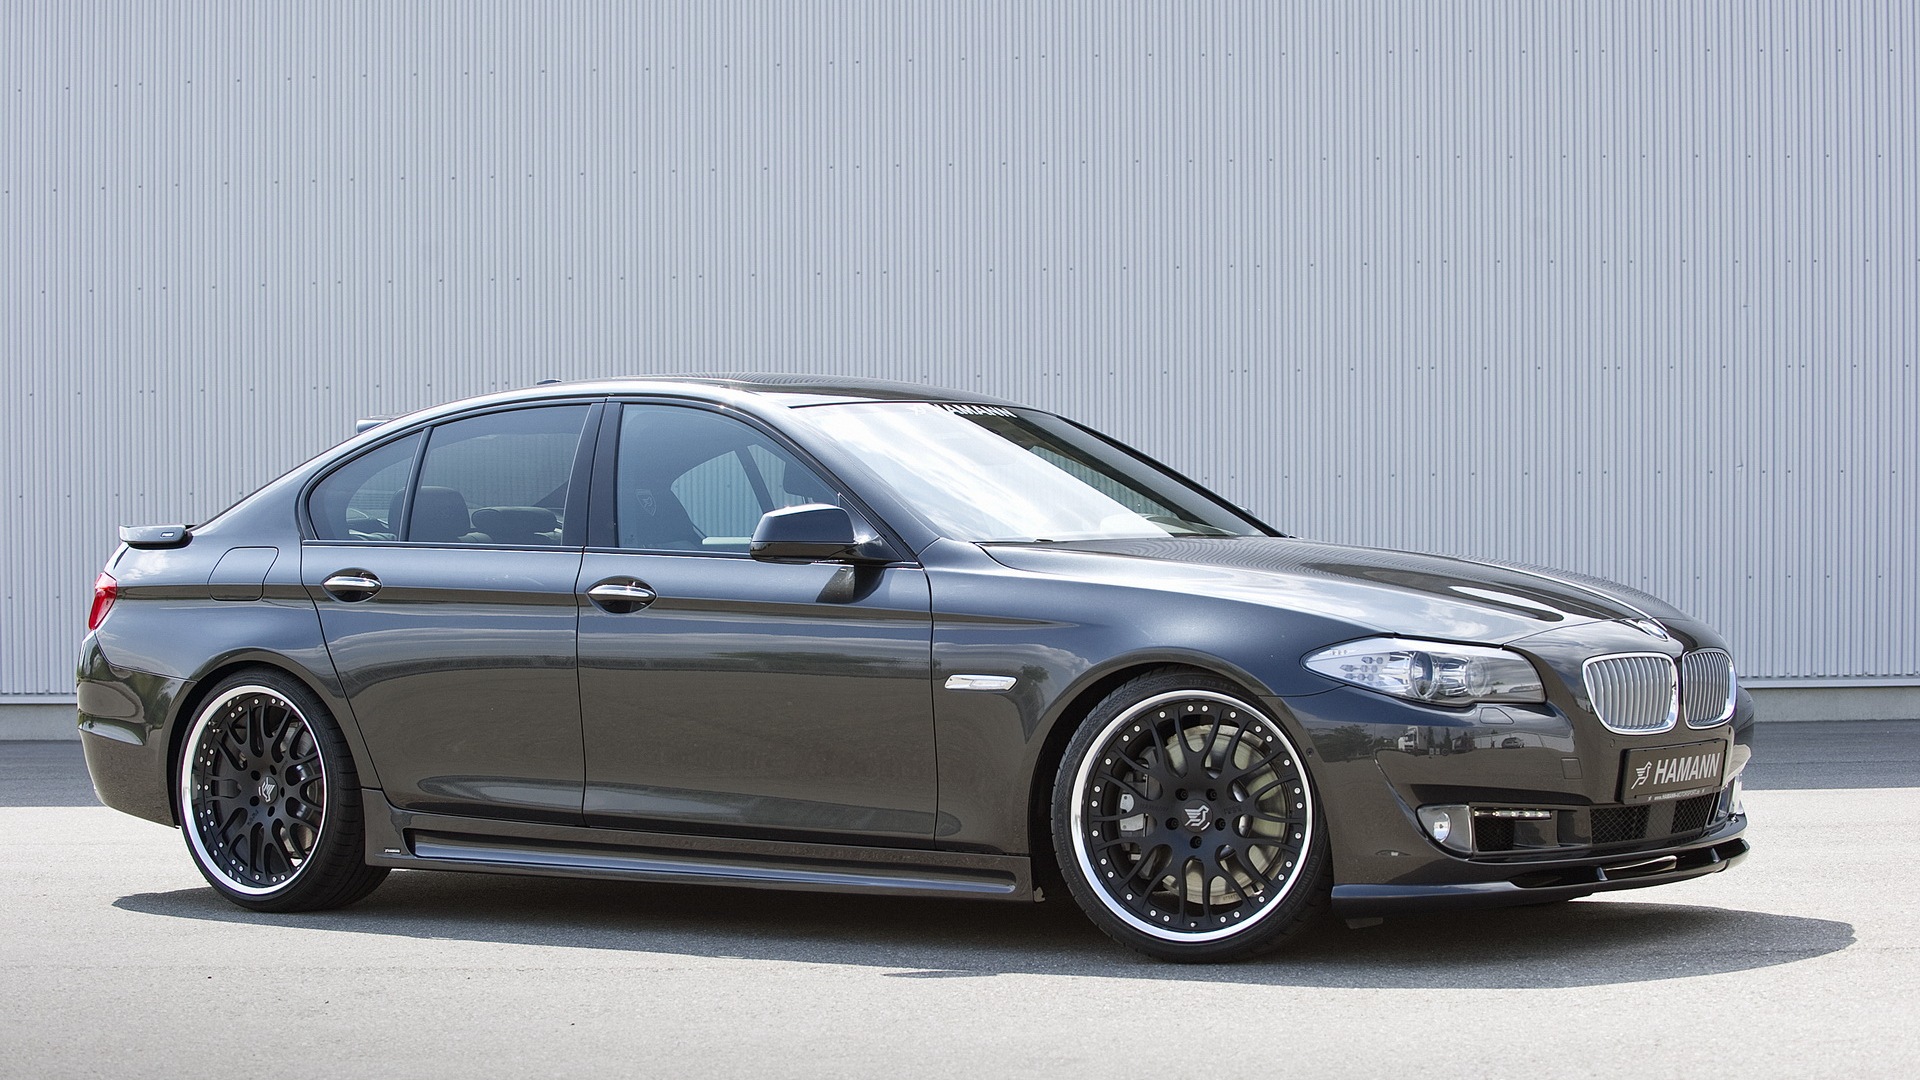 Exclusive Hamann Refining Programme For The Bmw F10